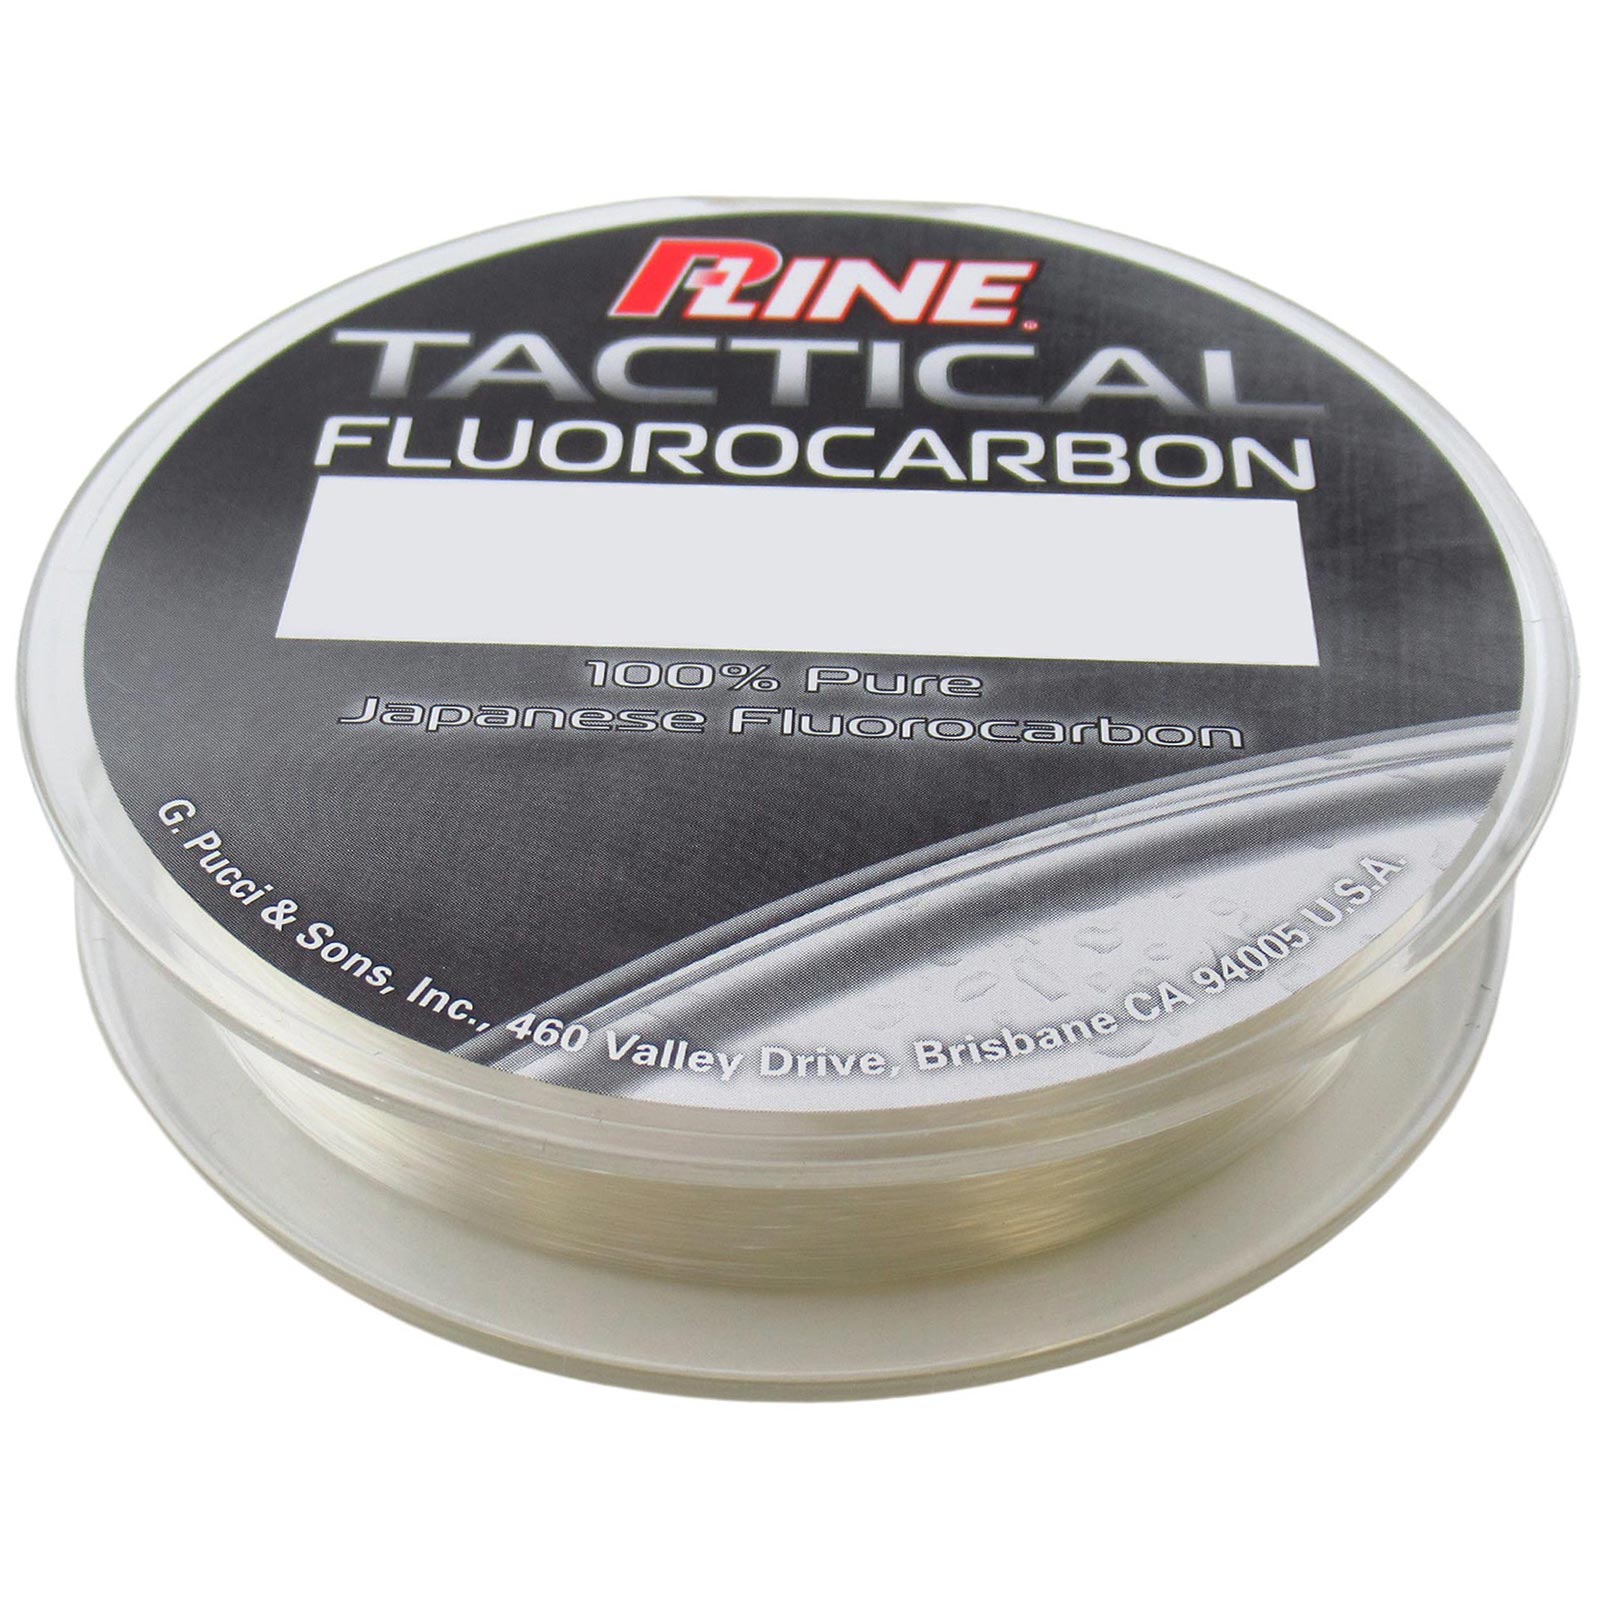 P-Line Tactical Fluorocarbon Fishing Line , Up to $2.50 Off